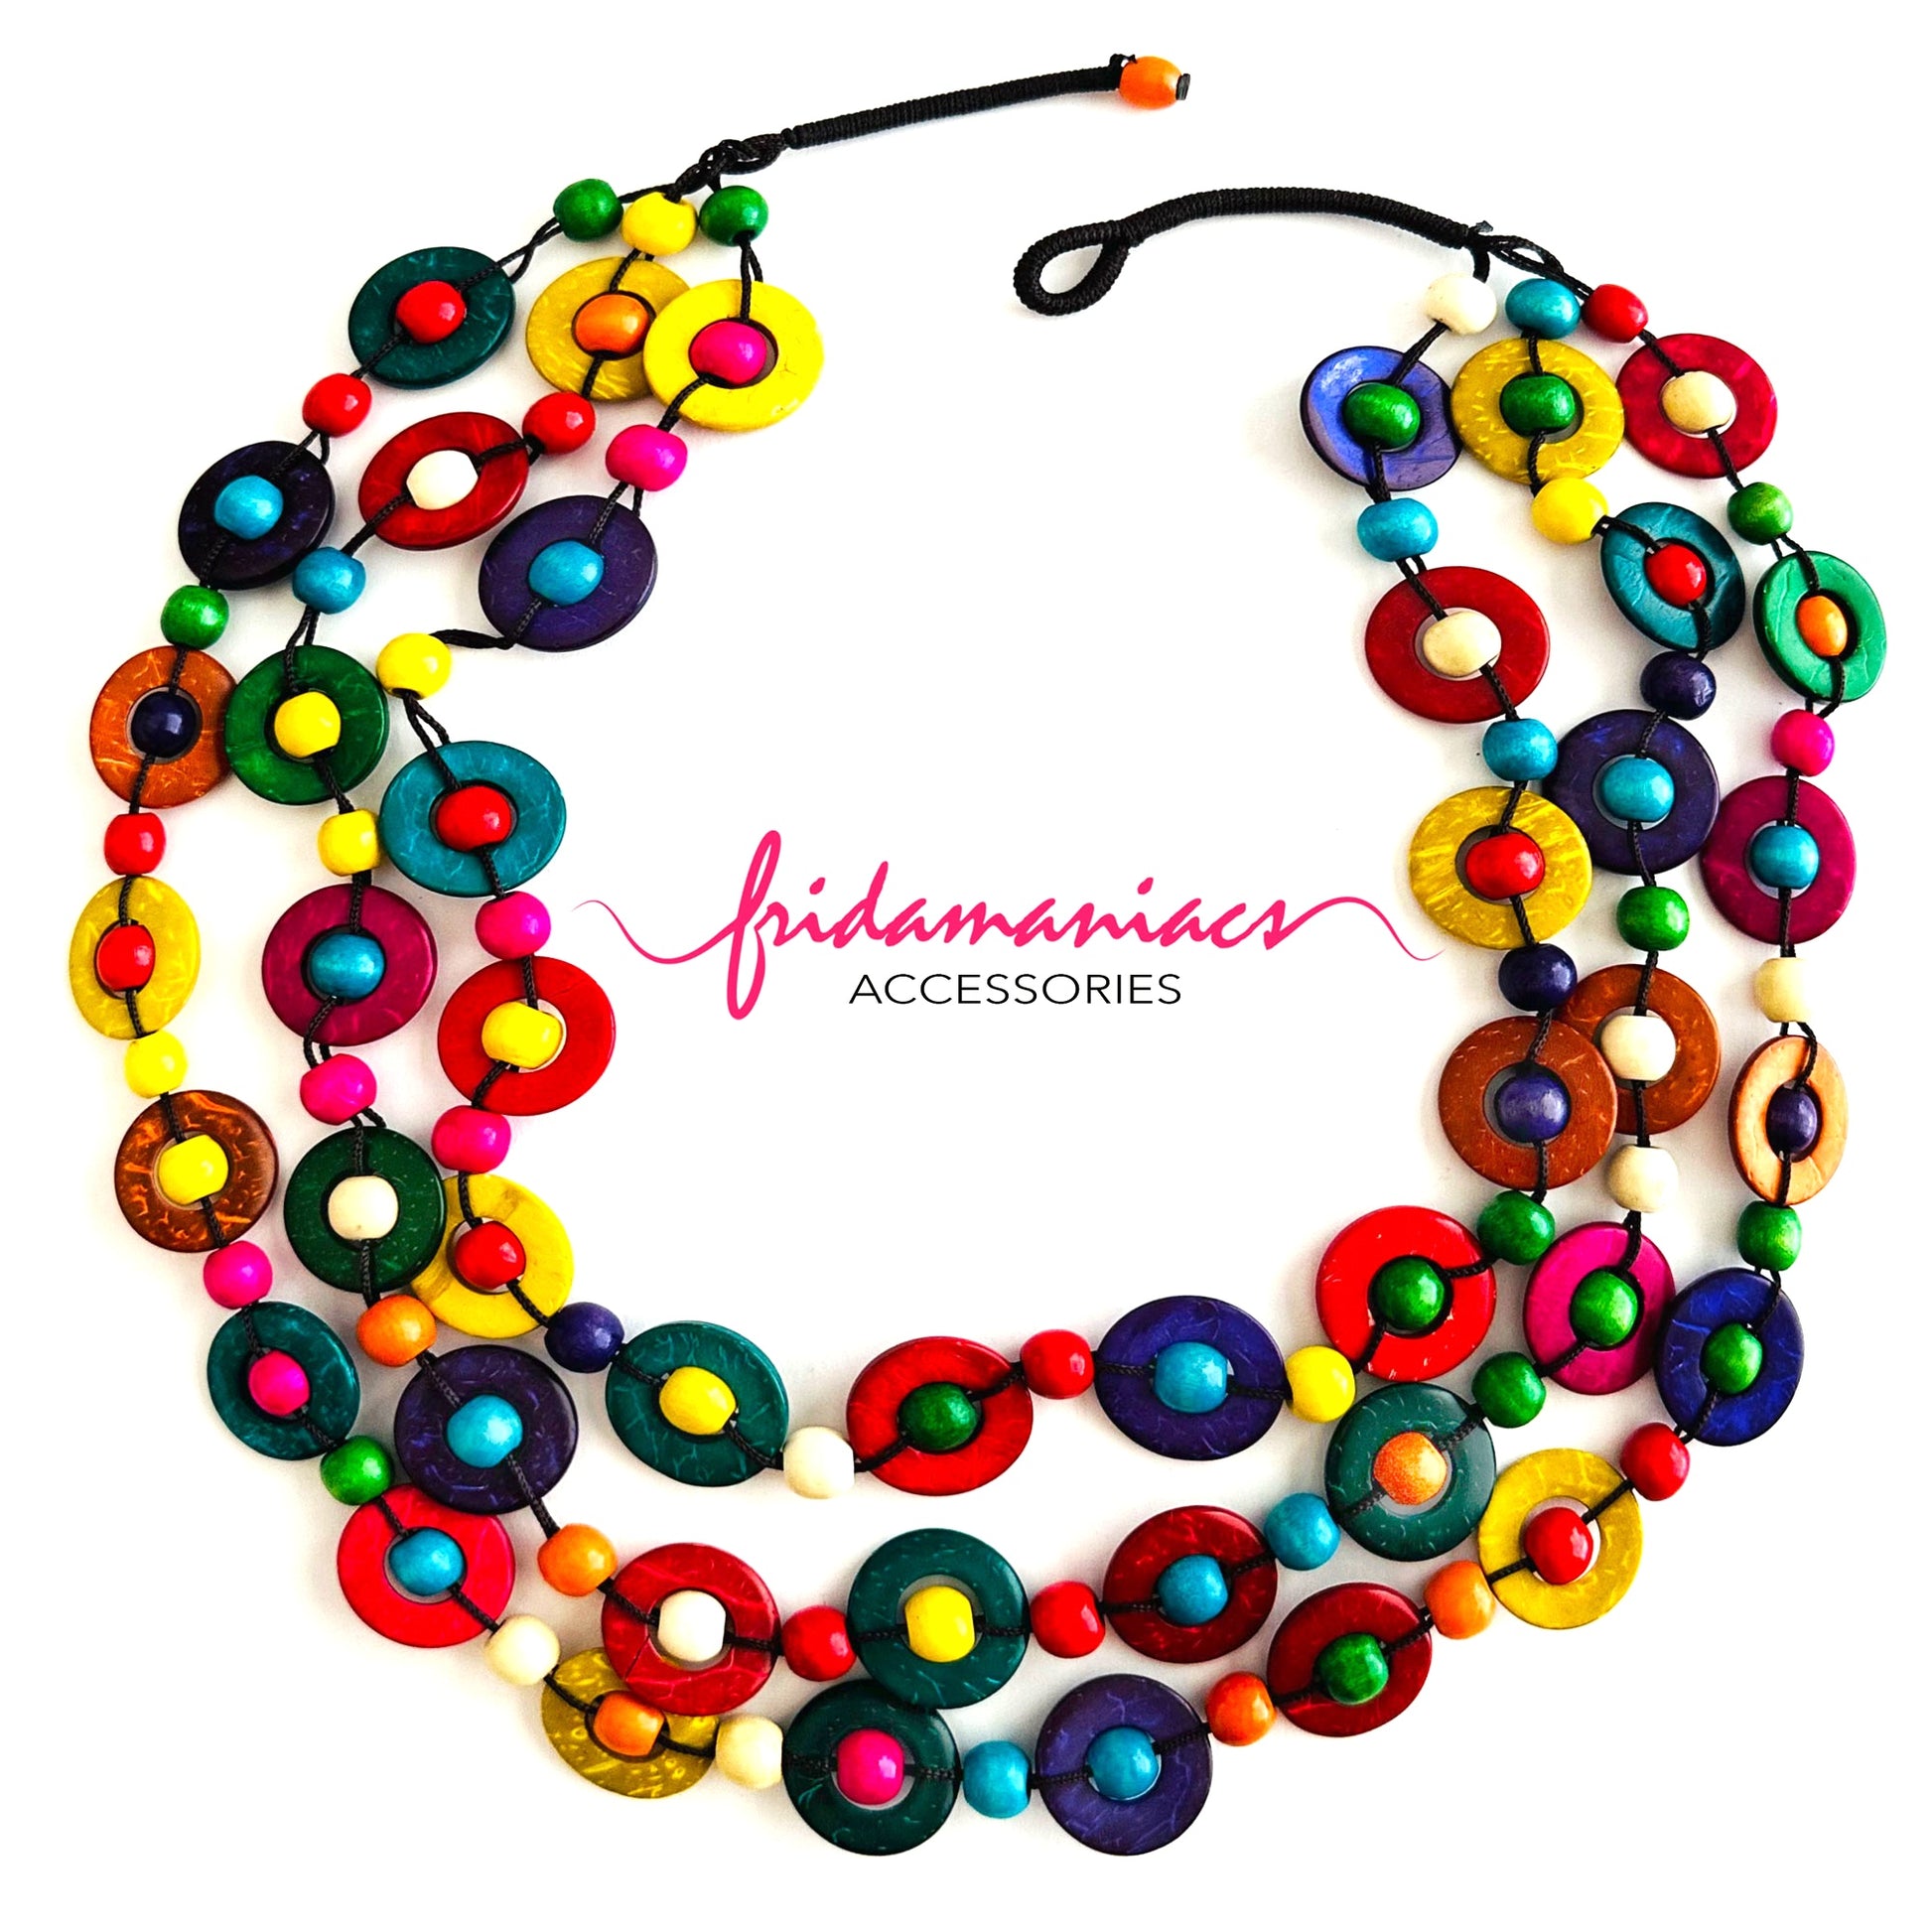 Colorful Frida Kahlo necklace made of coconut wood disks from Mexico. Mexican jewelry necklace for women and girls. Multilayered